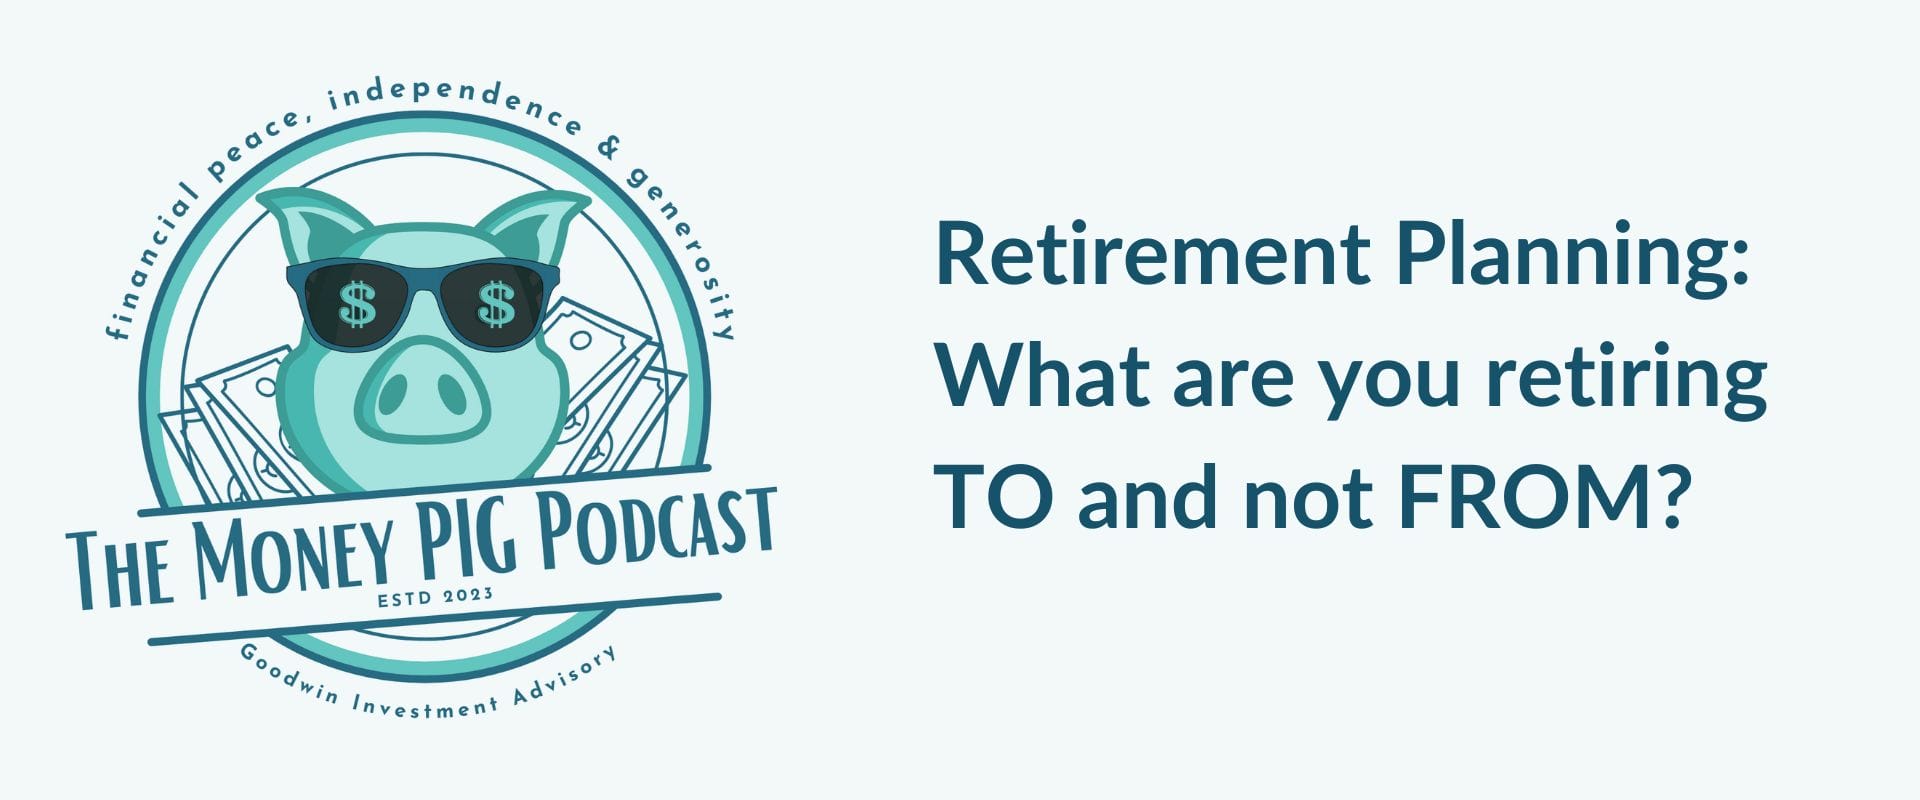 Retirement Planning: What are you retiring TO and not FROM?